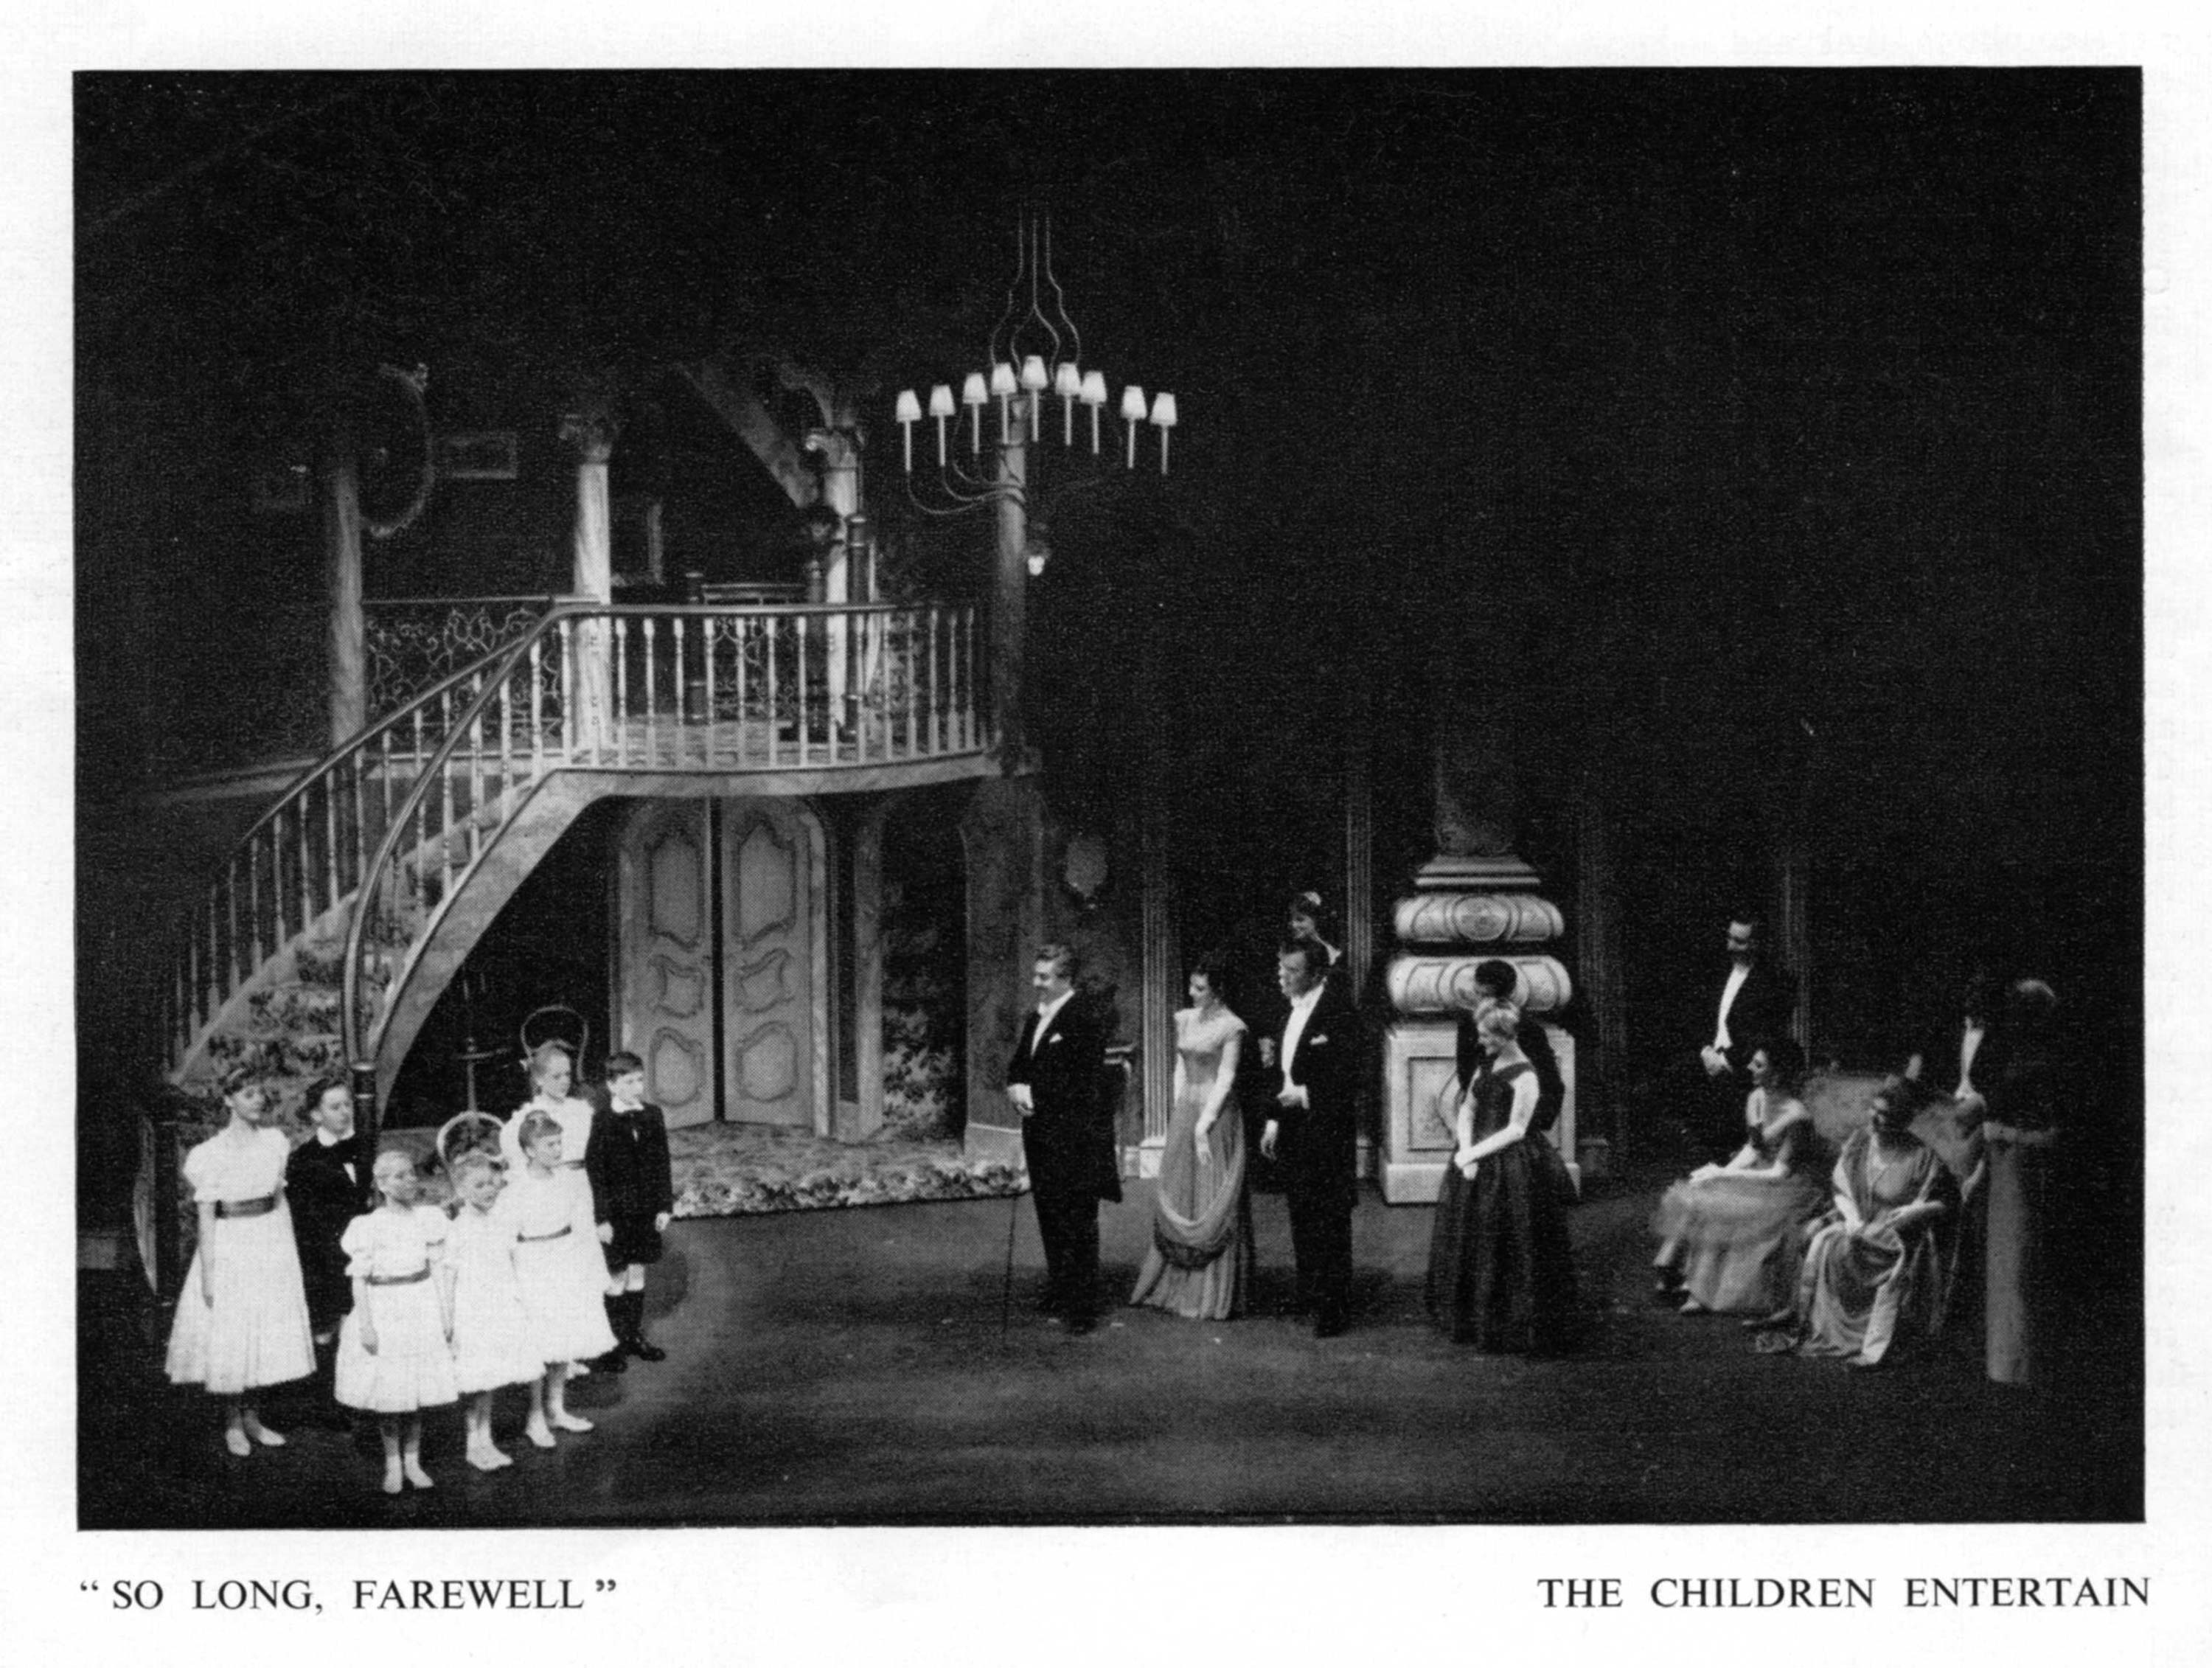 A photo from the 1961 West End production of The Sound of Music.